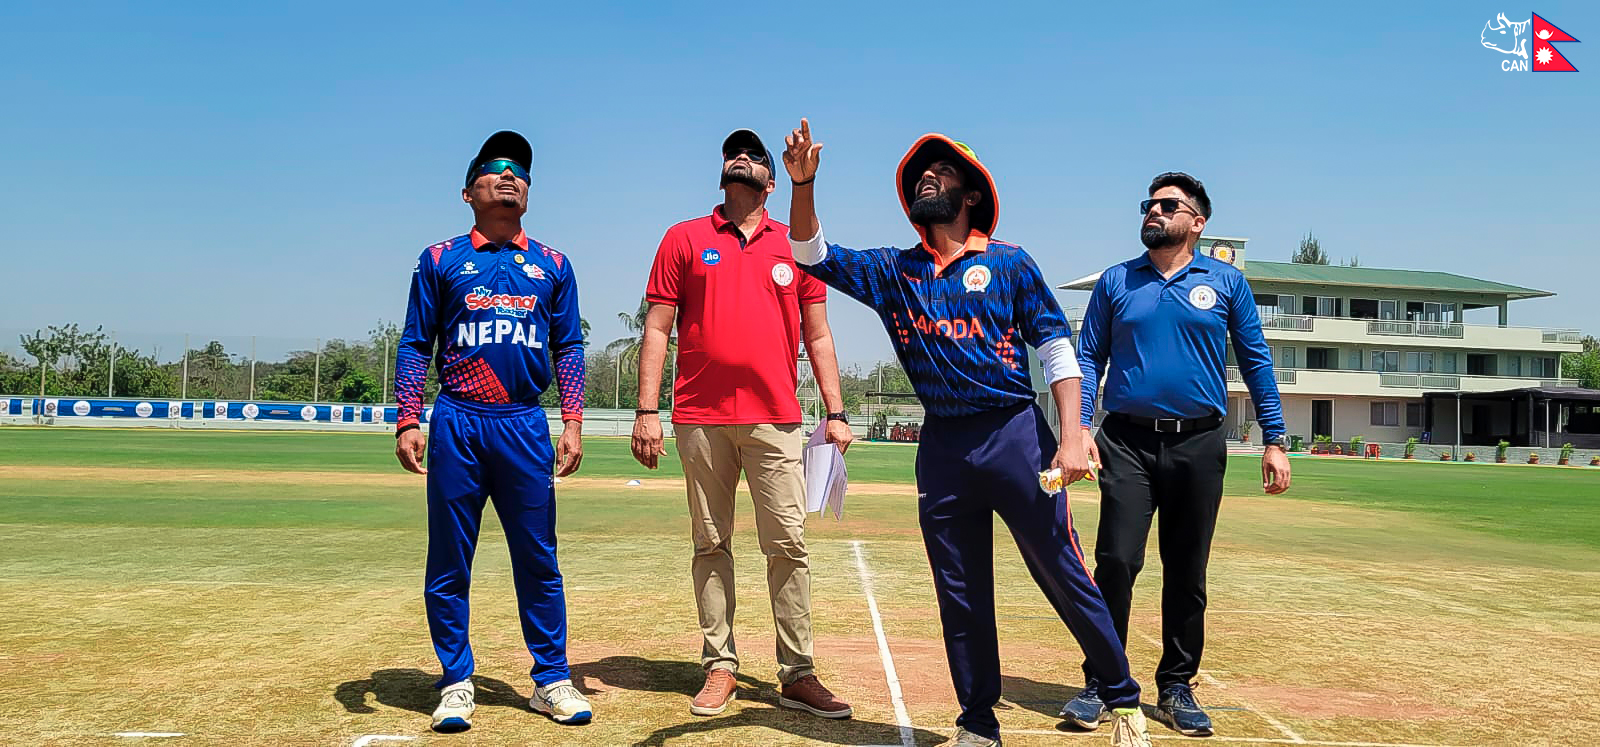 Nepal’s second win in a row, Baroda defeated by 27 runs